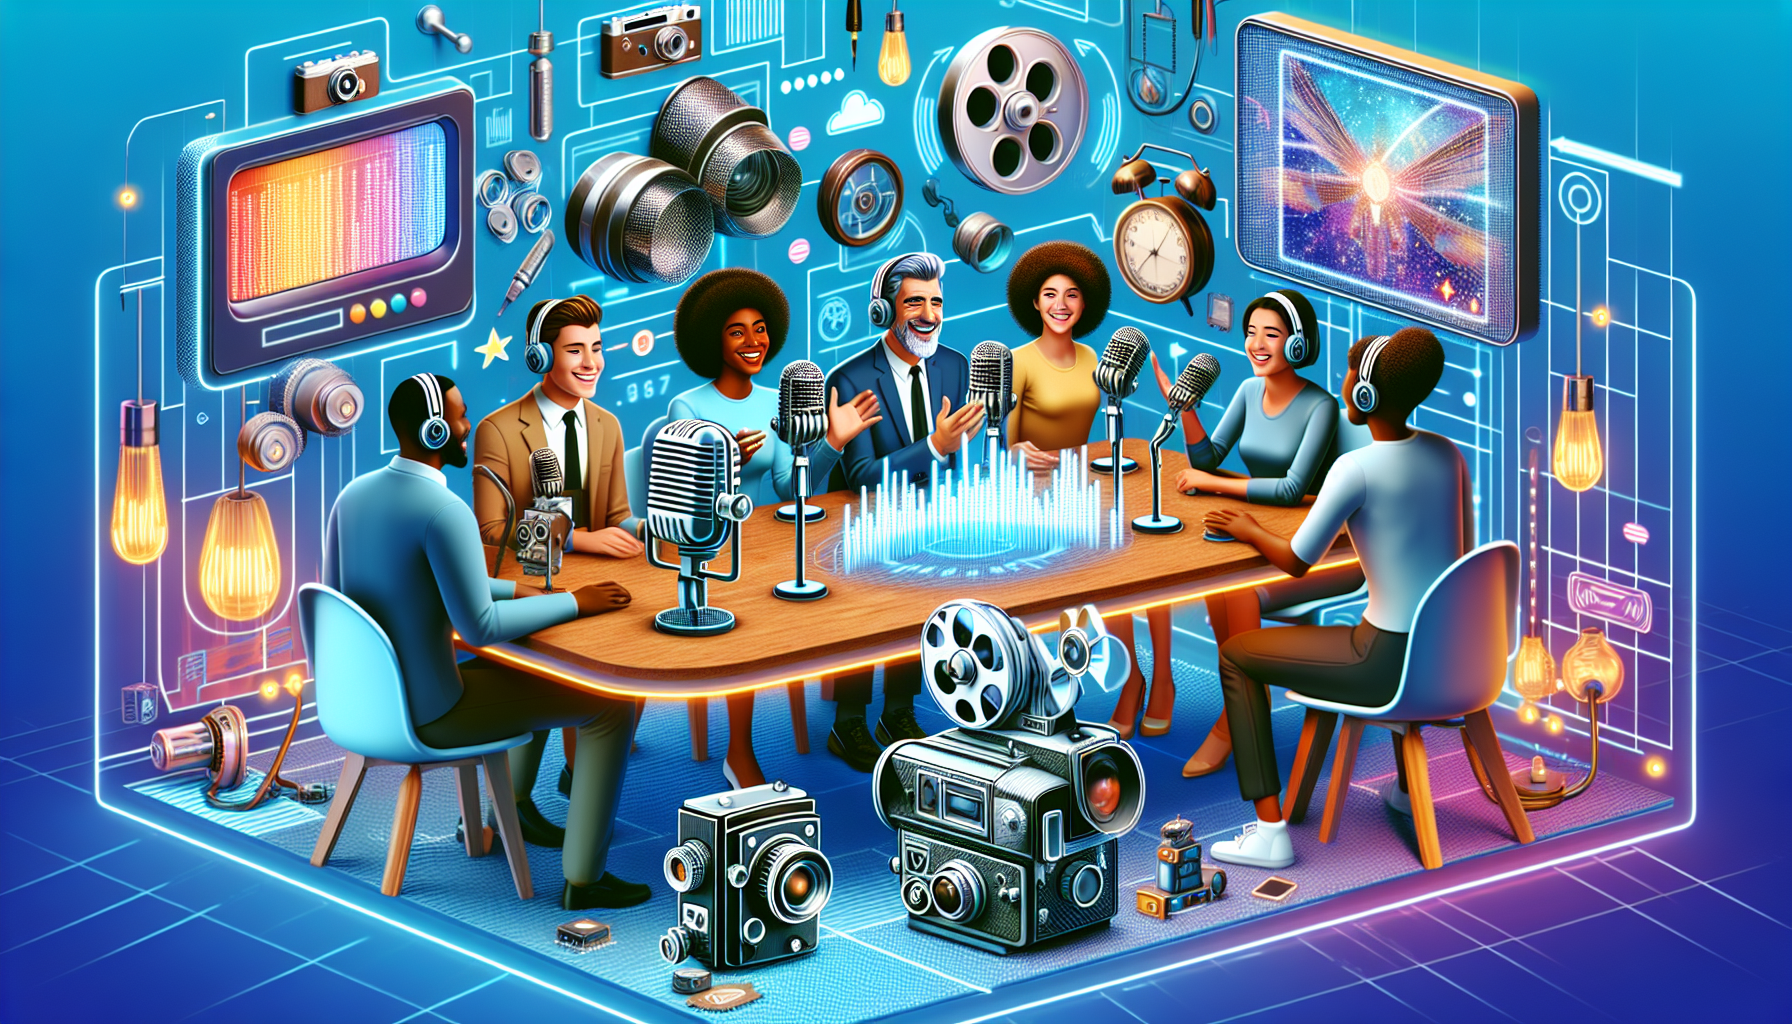 An imaginative podcast studio filled with futuristic gadgets and vintage film cameras, vividly depicting a diverse group of podcast hosts excitedly discussing film topics around a high-tech, holograph